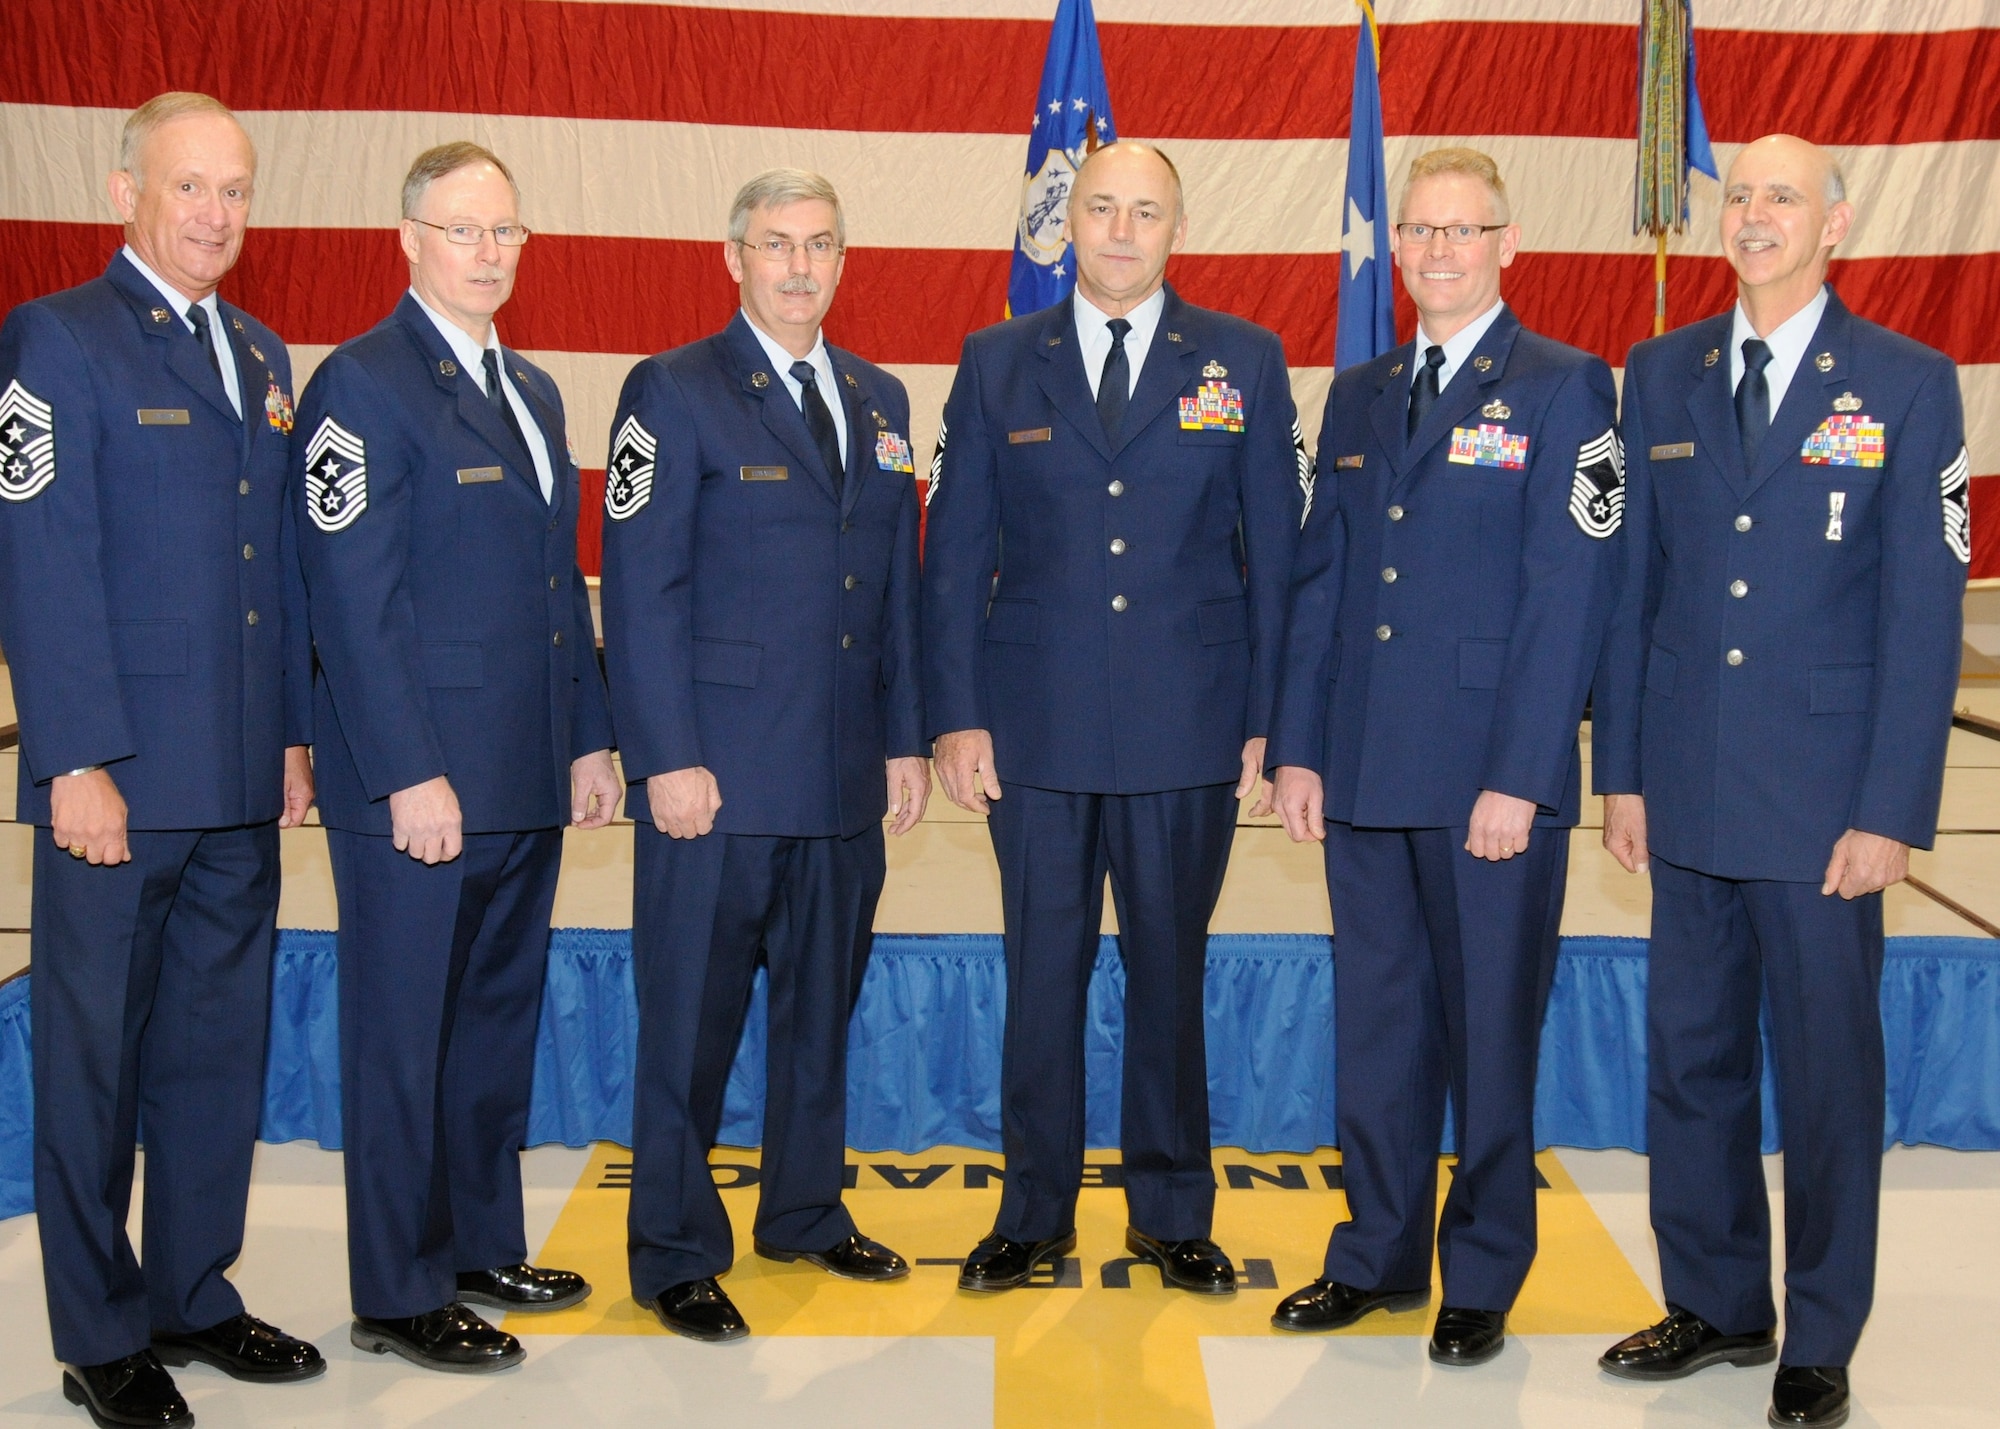 The six chief master sergeants who have served as the command chief master sergeant or senior enlisted advisor of the 127th Wing gathered together March 12, 2011, to mark the occasion of the installation of the wing’s current command chief, Chief Master Sgt. Robert Dobson. At the ceremony were CMSgt. (ret.) William Livesay; CMSgt. Michael Dalton, who is currently the command chief for the Michigan Air National Guard; CMSgt. (ret.) Keith Edwards, the wing’s outgoing command chief who retired in the same ceremony; CMSgt. James Hewett; CMSgt. Dobson; and CMSgt. (ret.) Stephen Krajewski. The ceremony at Selfridge Air National Guard Base, Mich., marked the first time all of the wing’s former senior enlisted member had been together. (U.S. Air Force photo by TSgt. David Kujawa) (RELEASED)